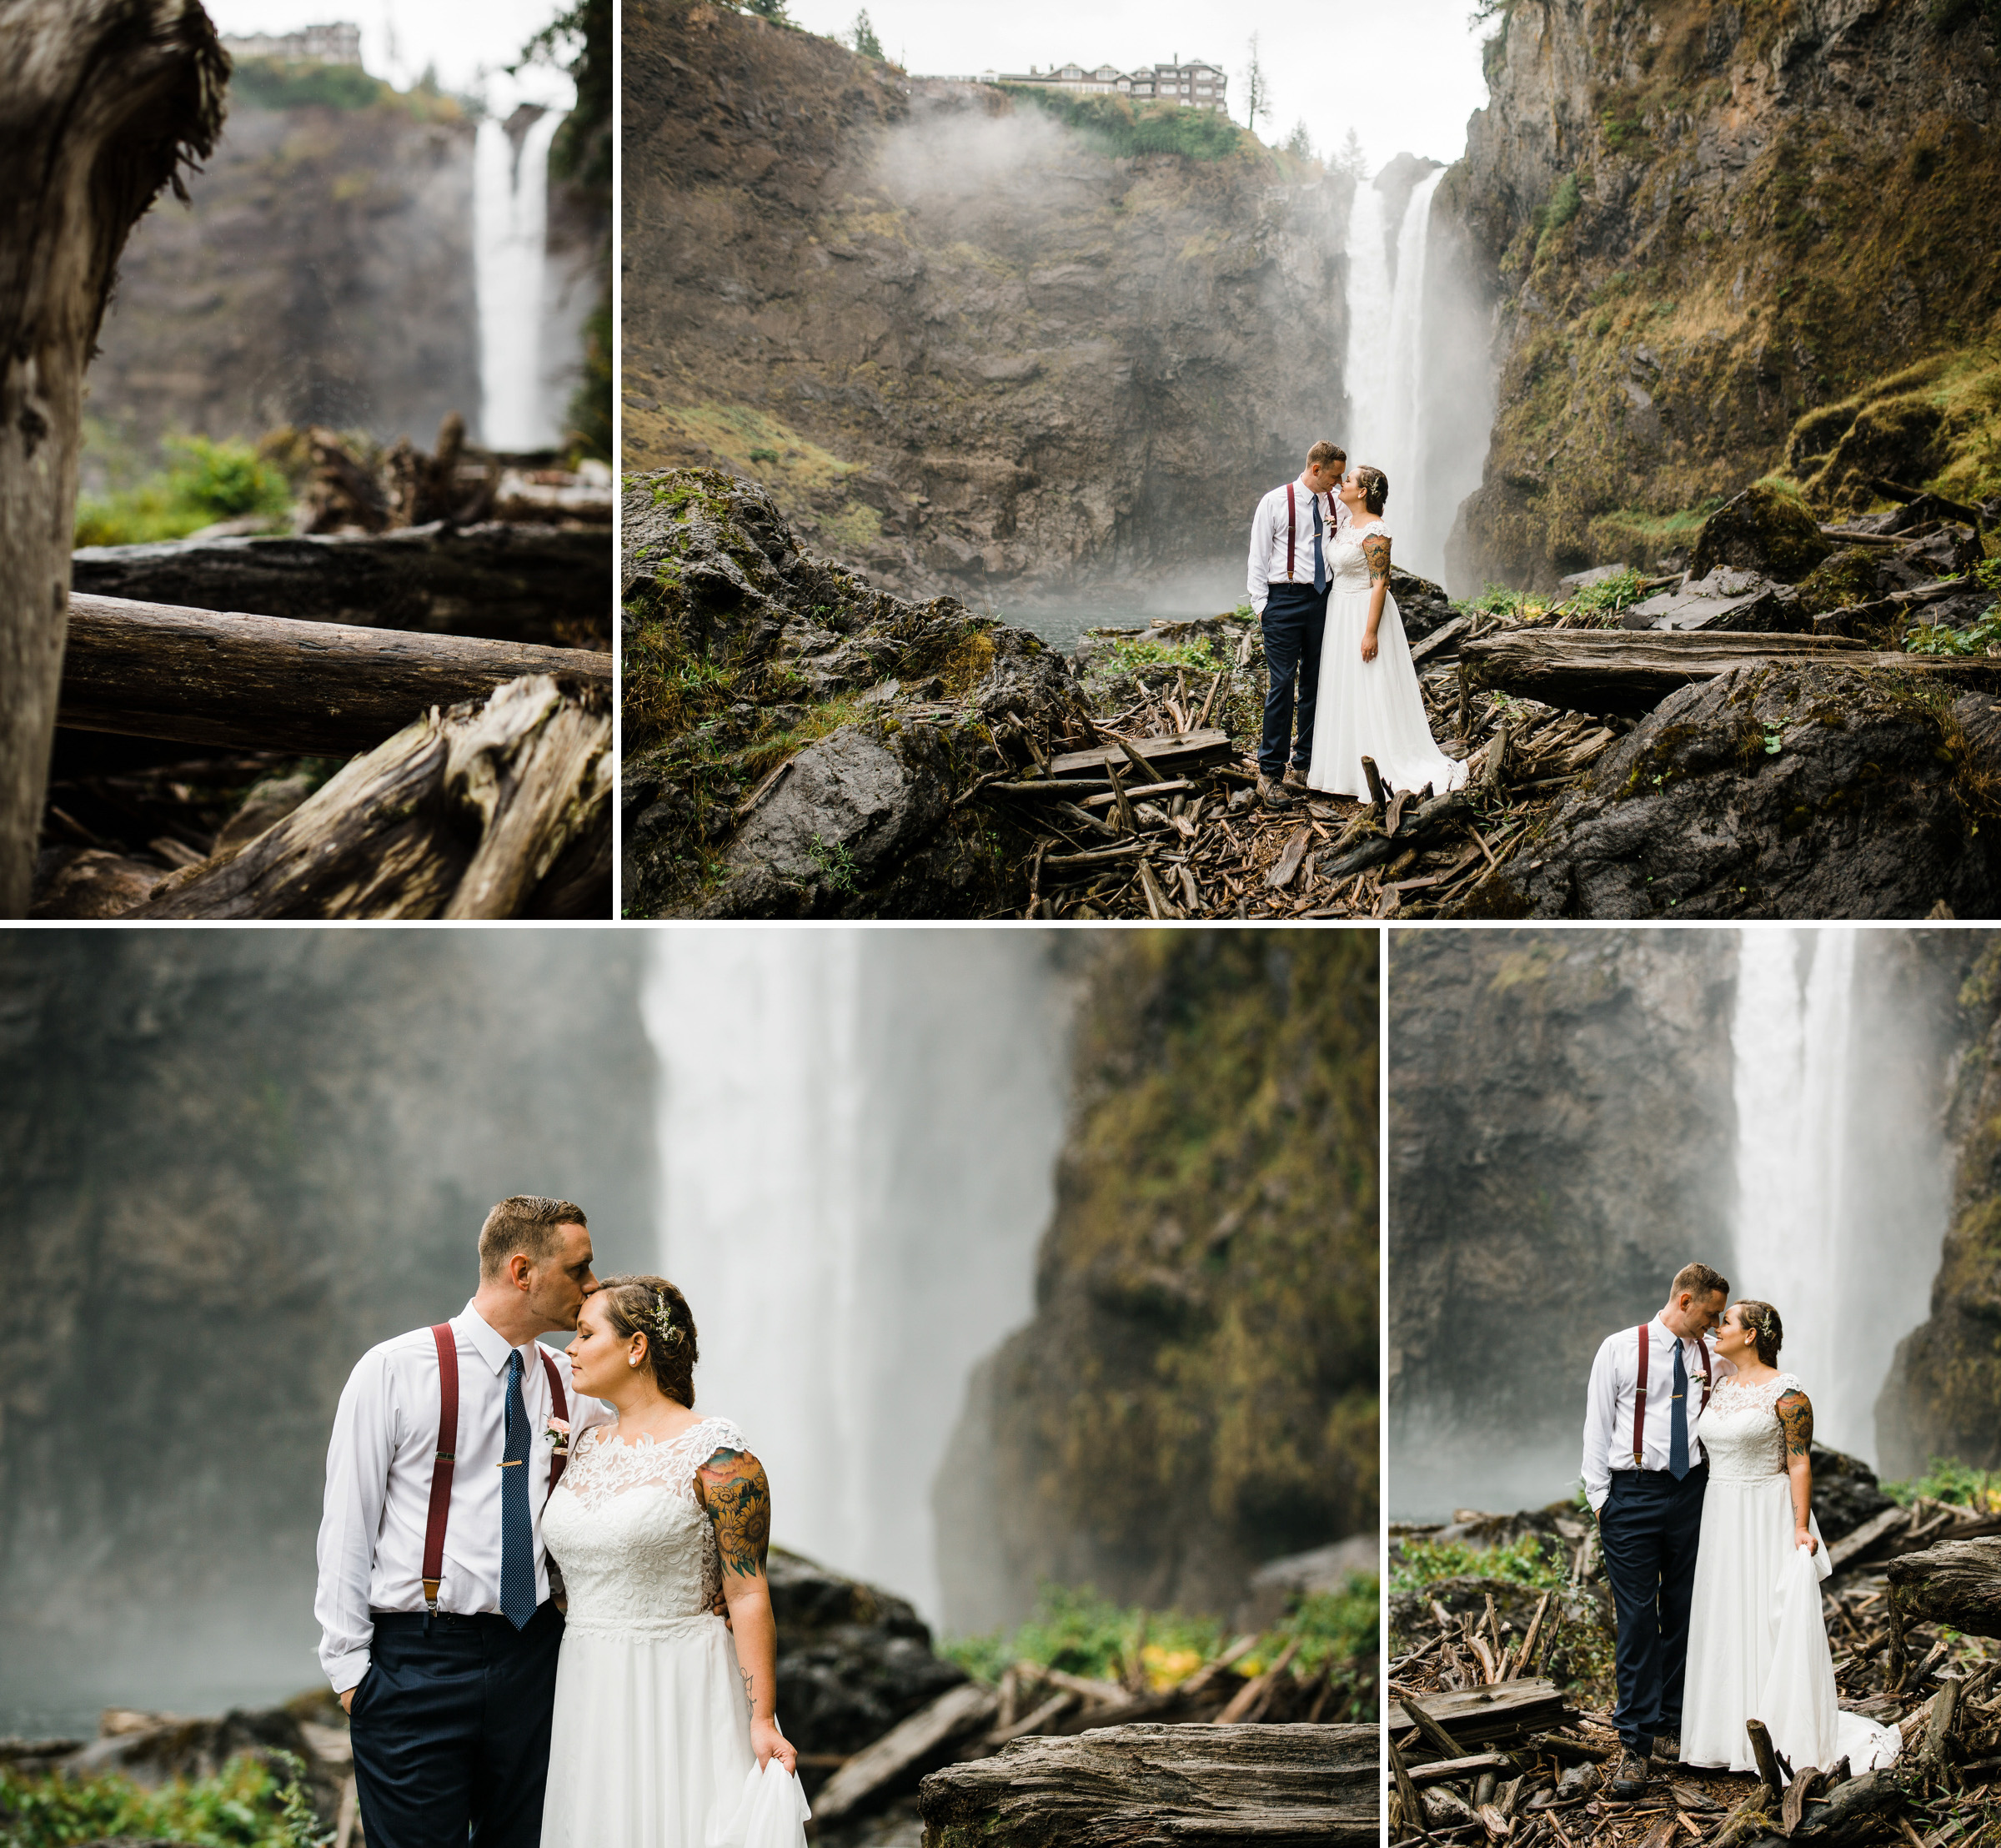 13-Seattle-Elopement-Photographer-Snoqualmie-Pass-Water-Falls-Hiking-Adventure-Wedding-Photography